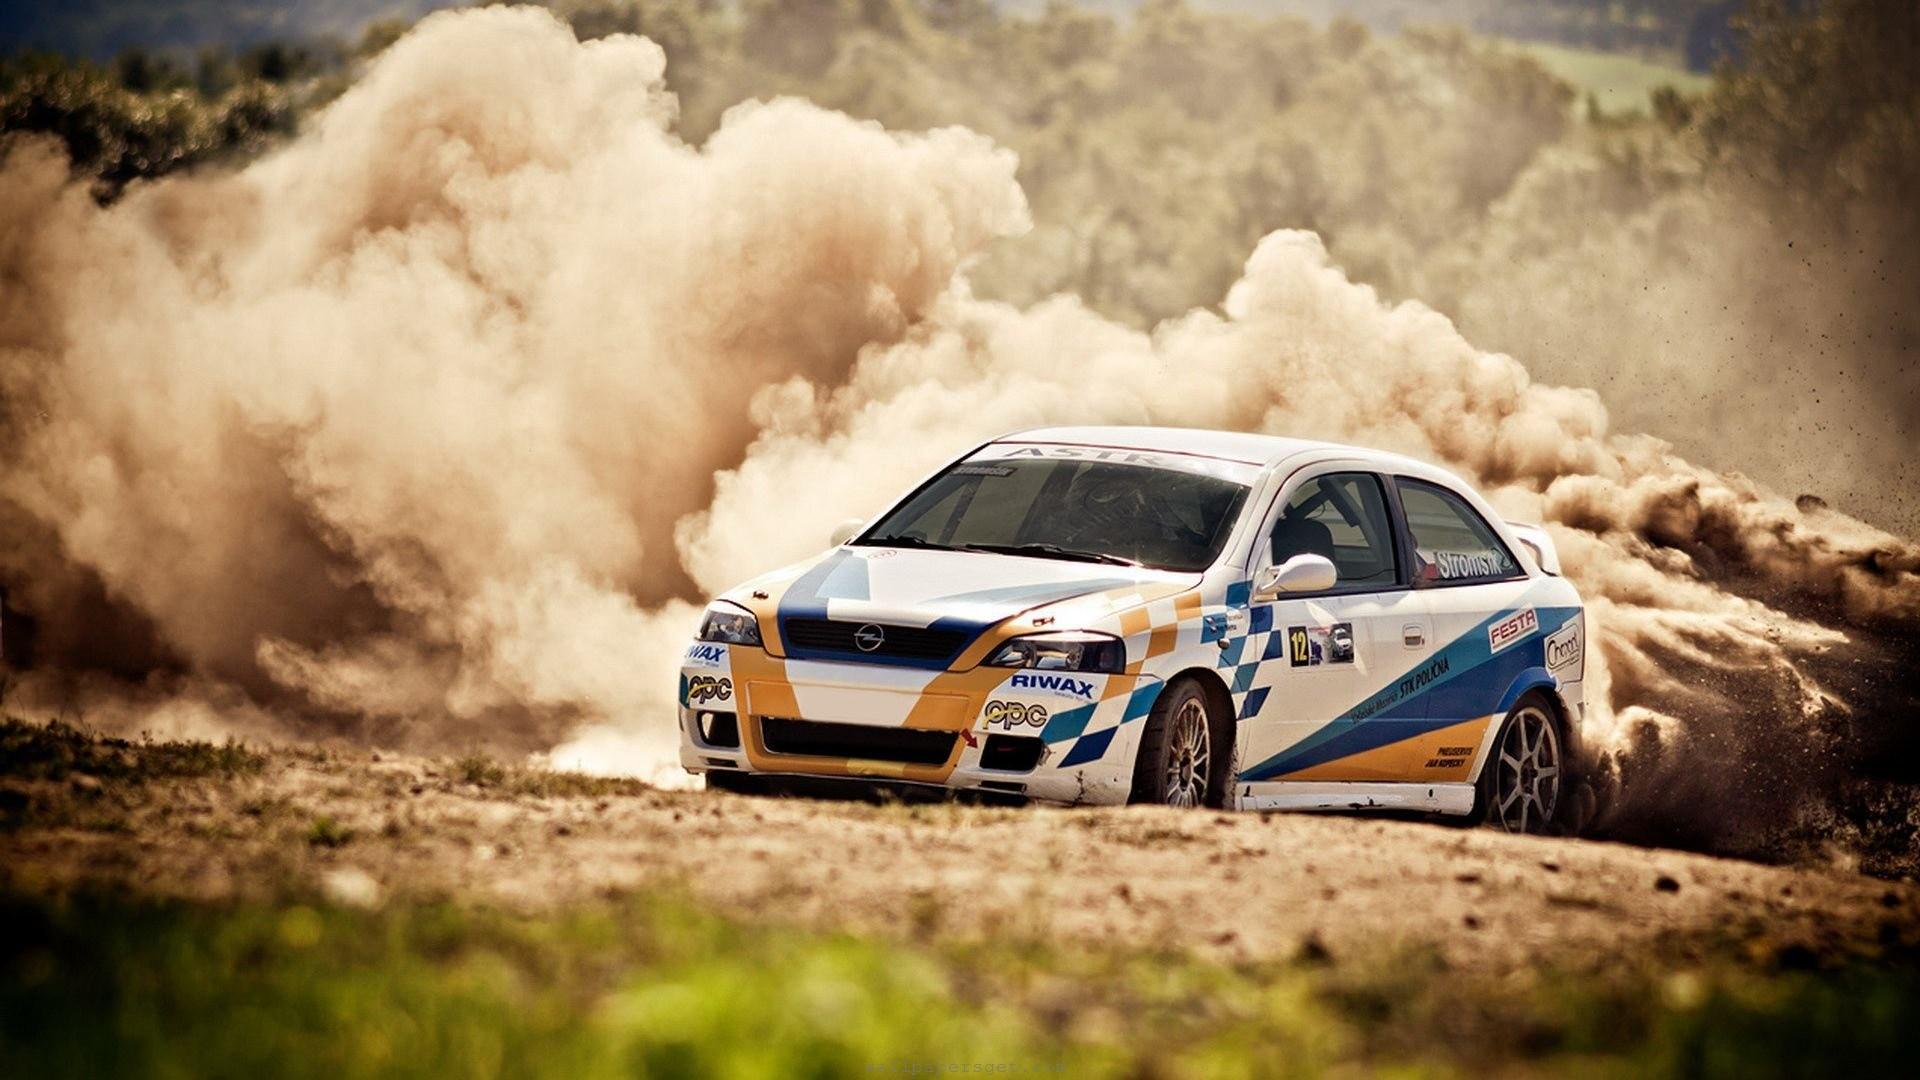 Rally Car Hd Wallpapers Top Free Rally Car Hd Backgrounds Images, Photos, Reviews